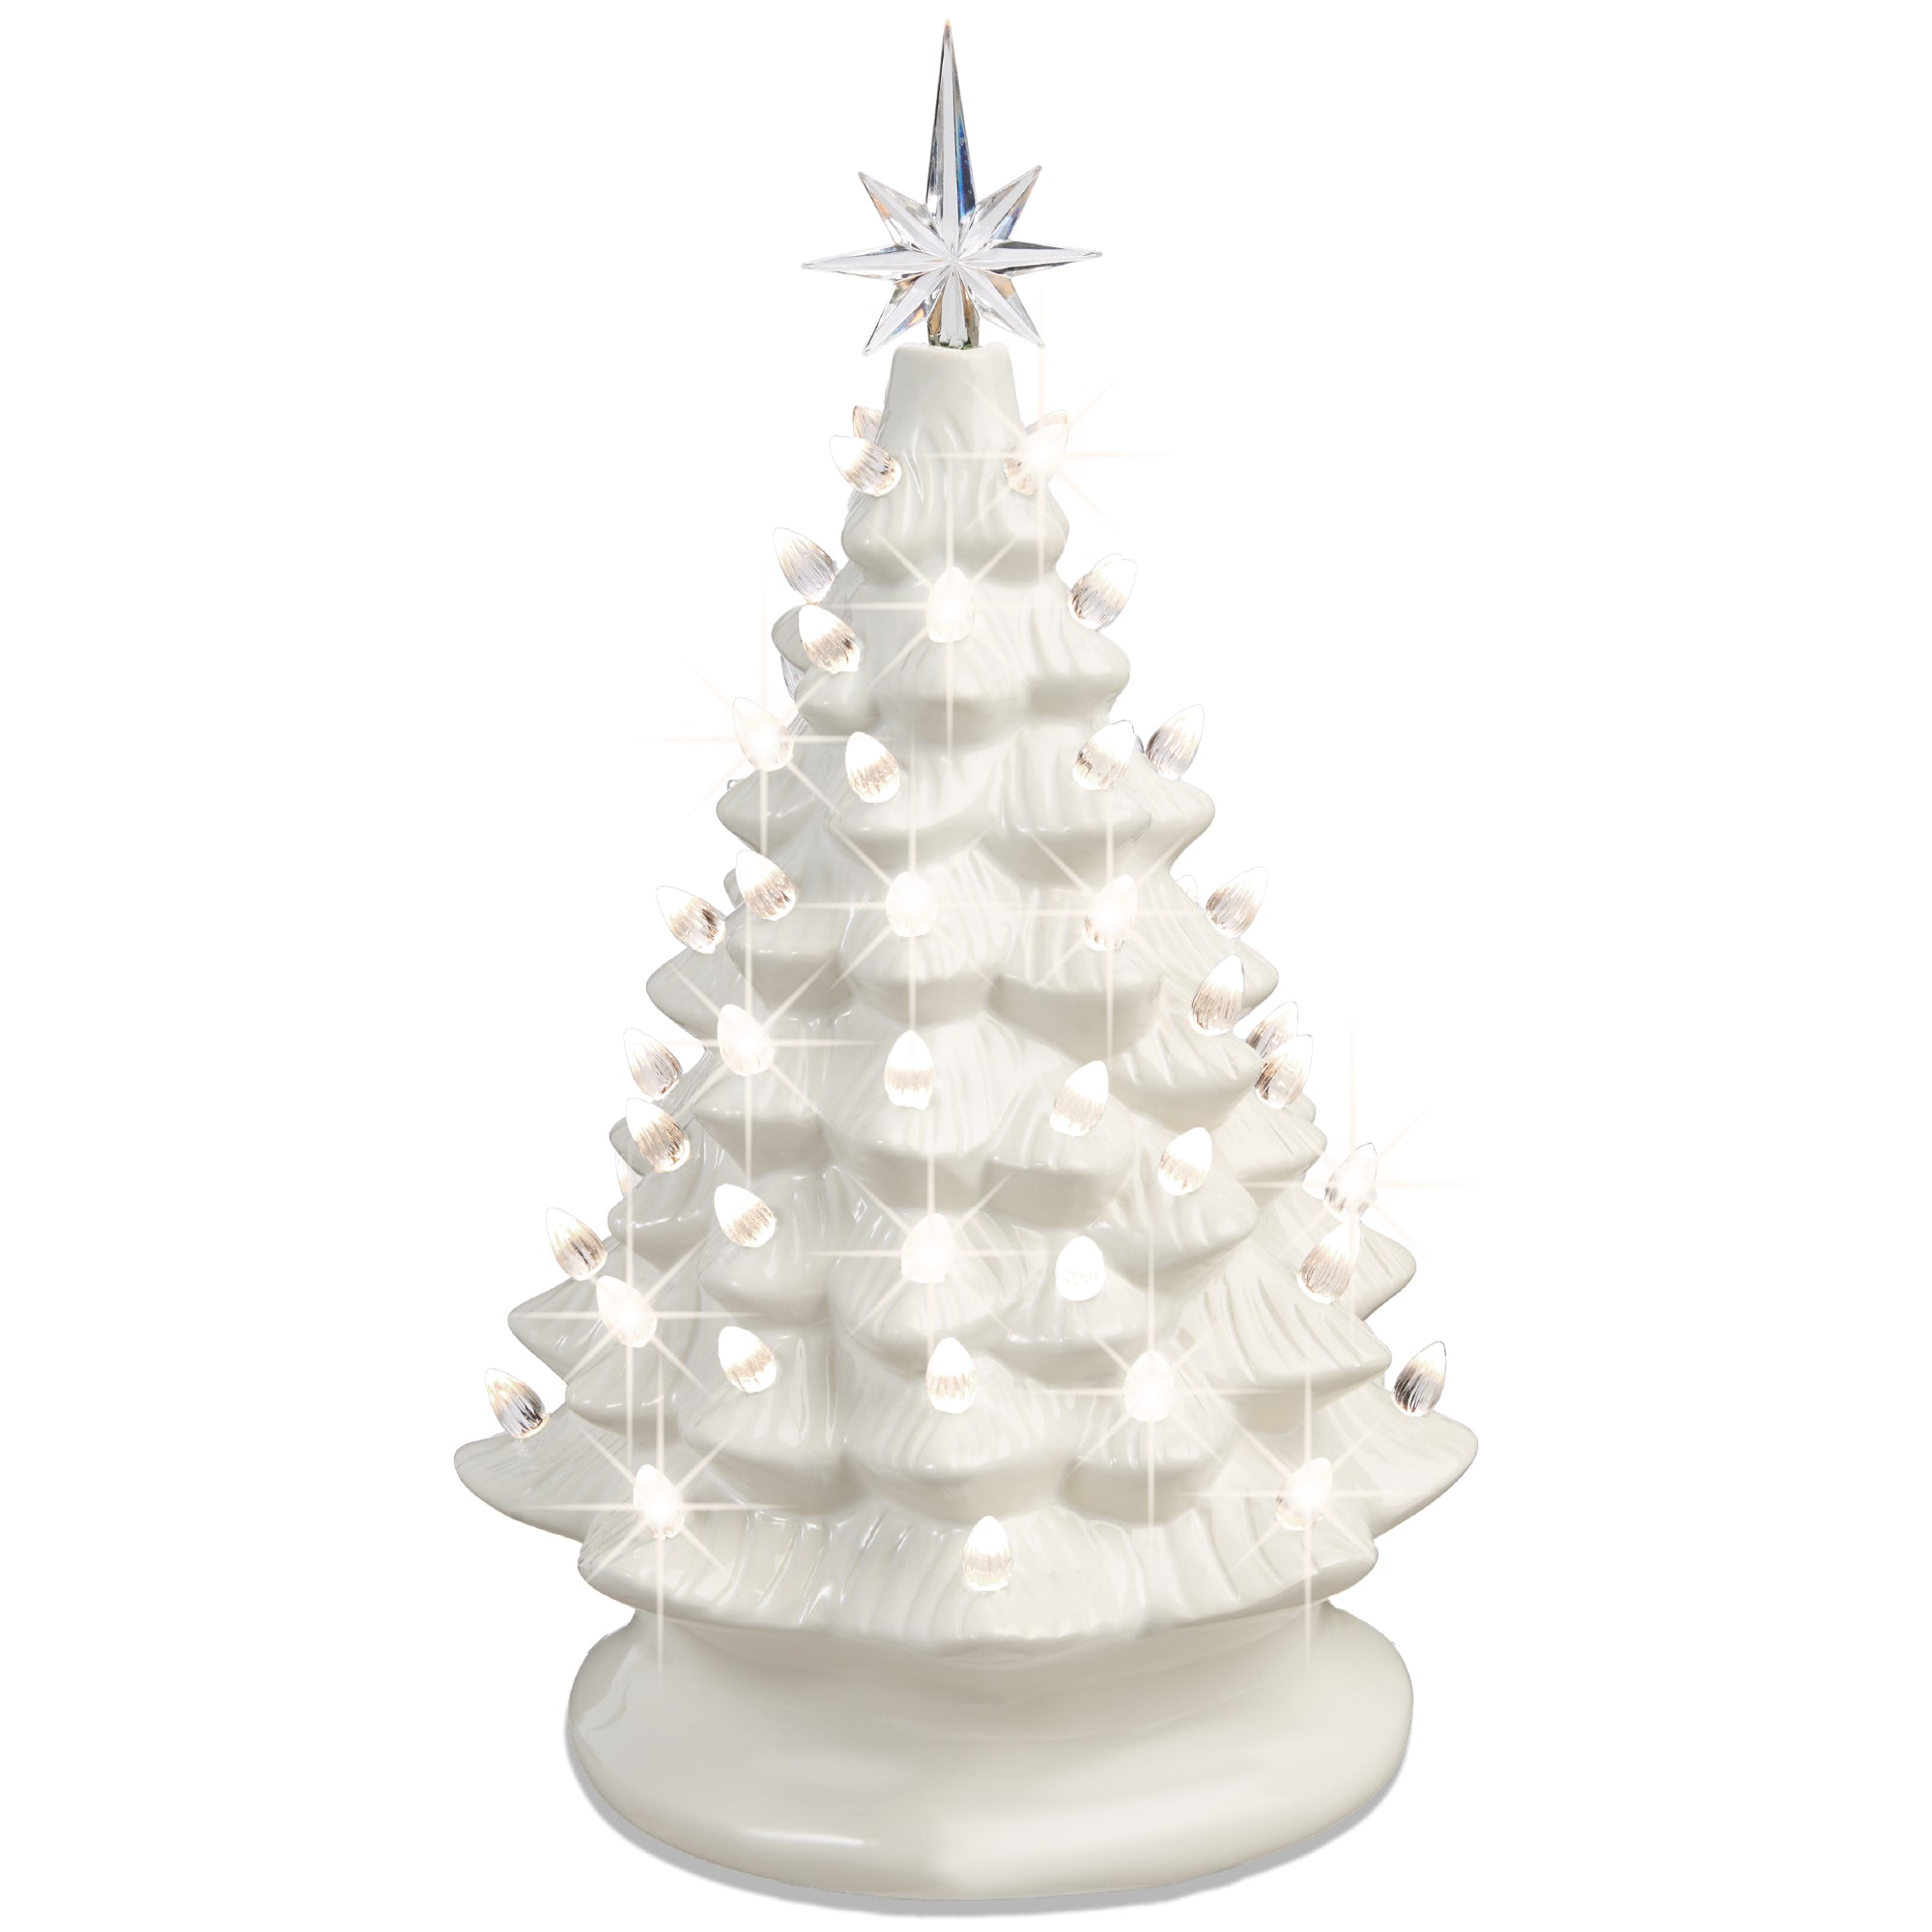 14 Indoor/Outdoor Battery-Operated Lighted Ceramic Christmas Tree - White